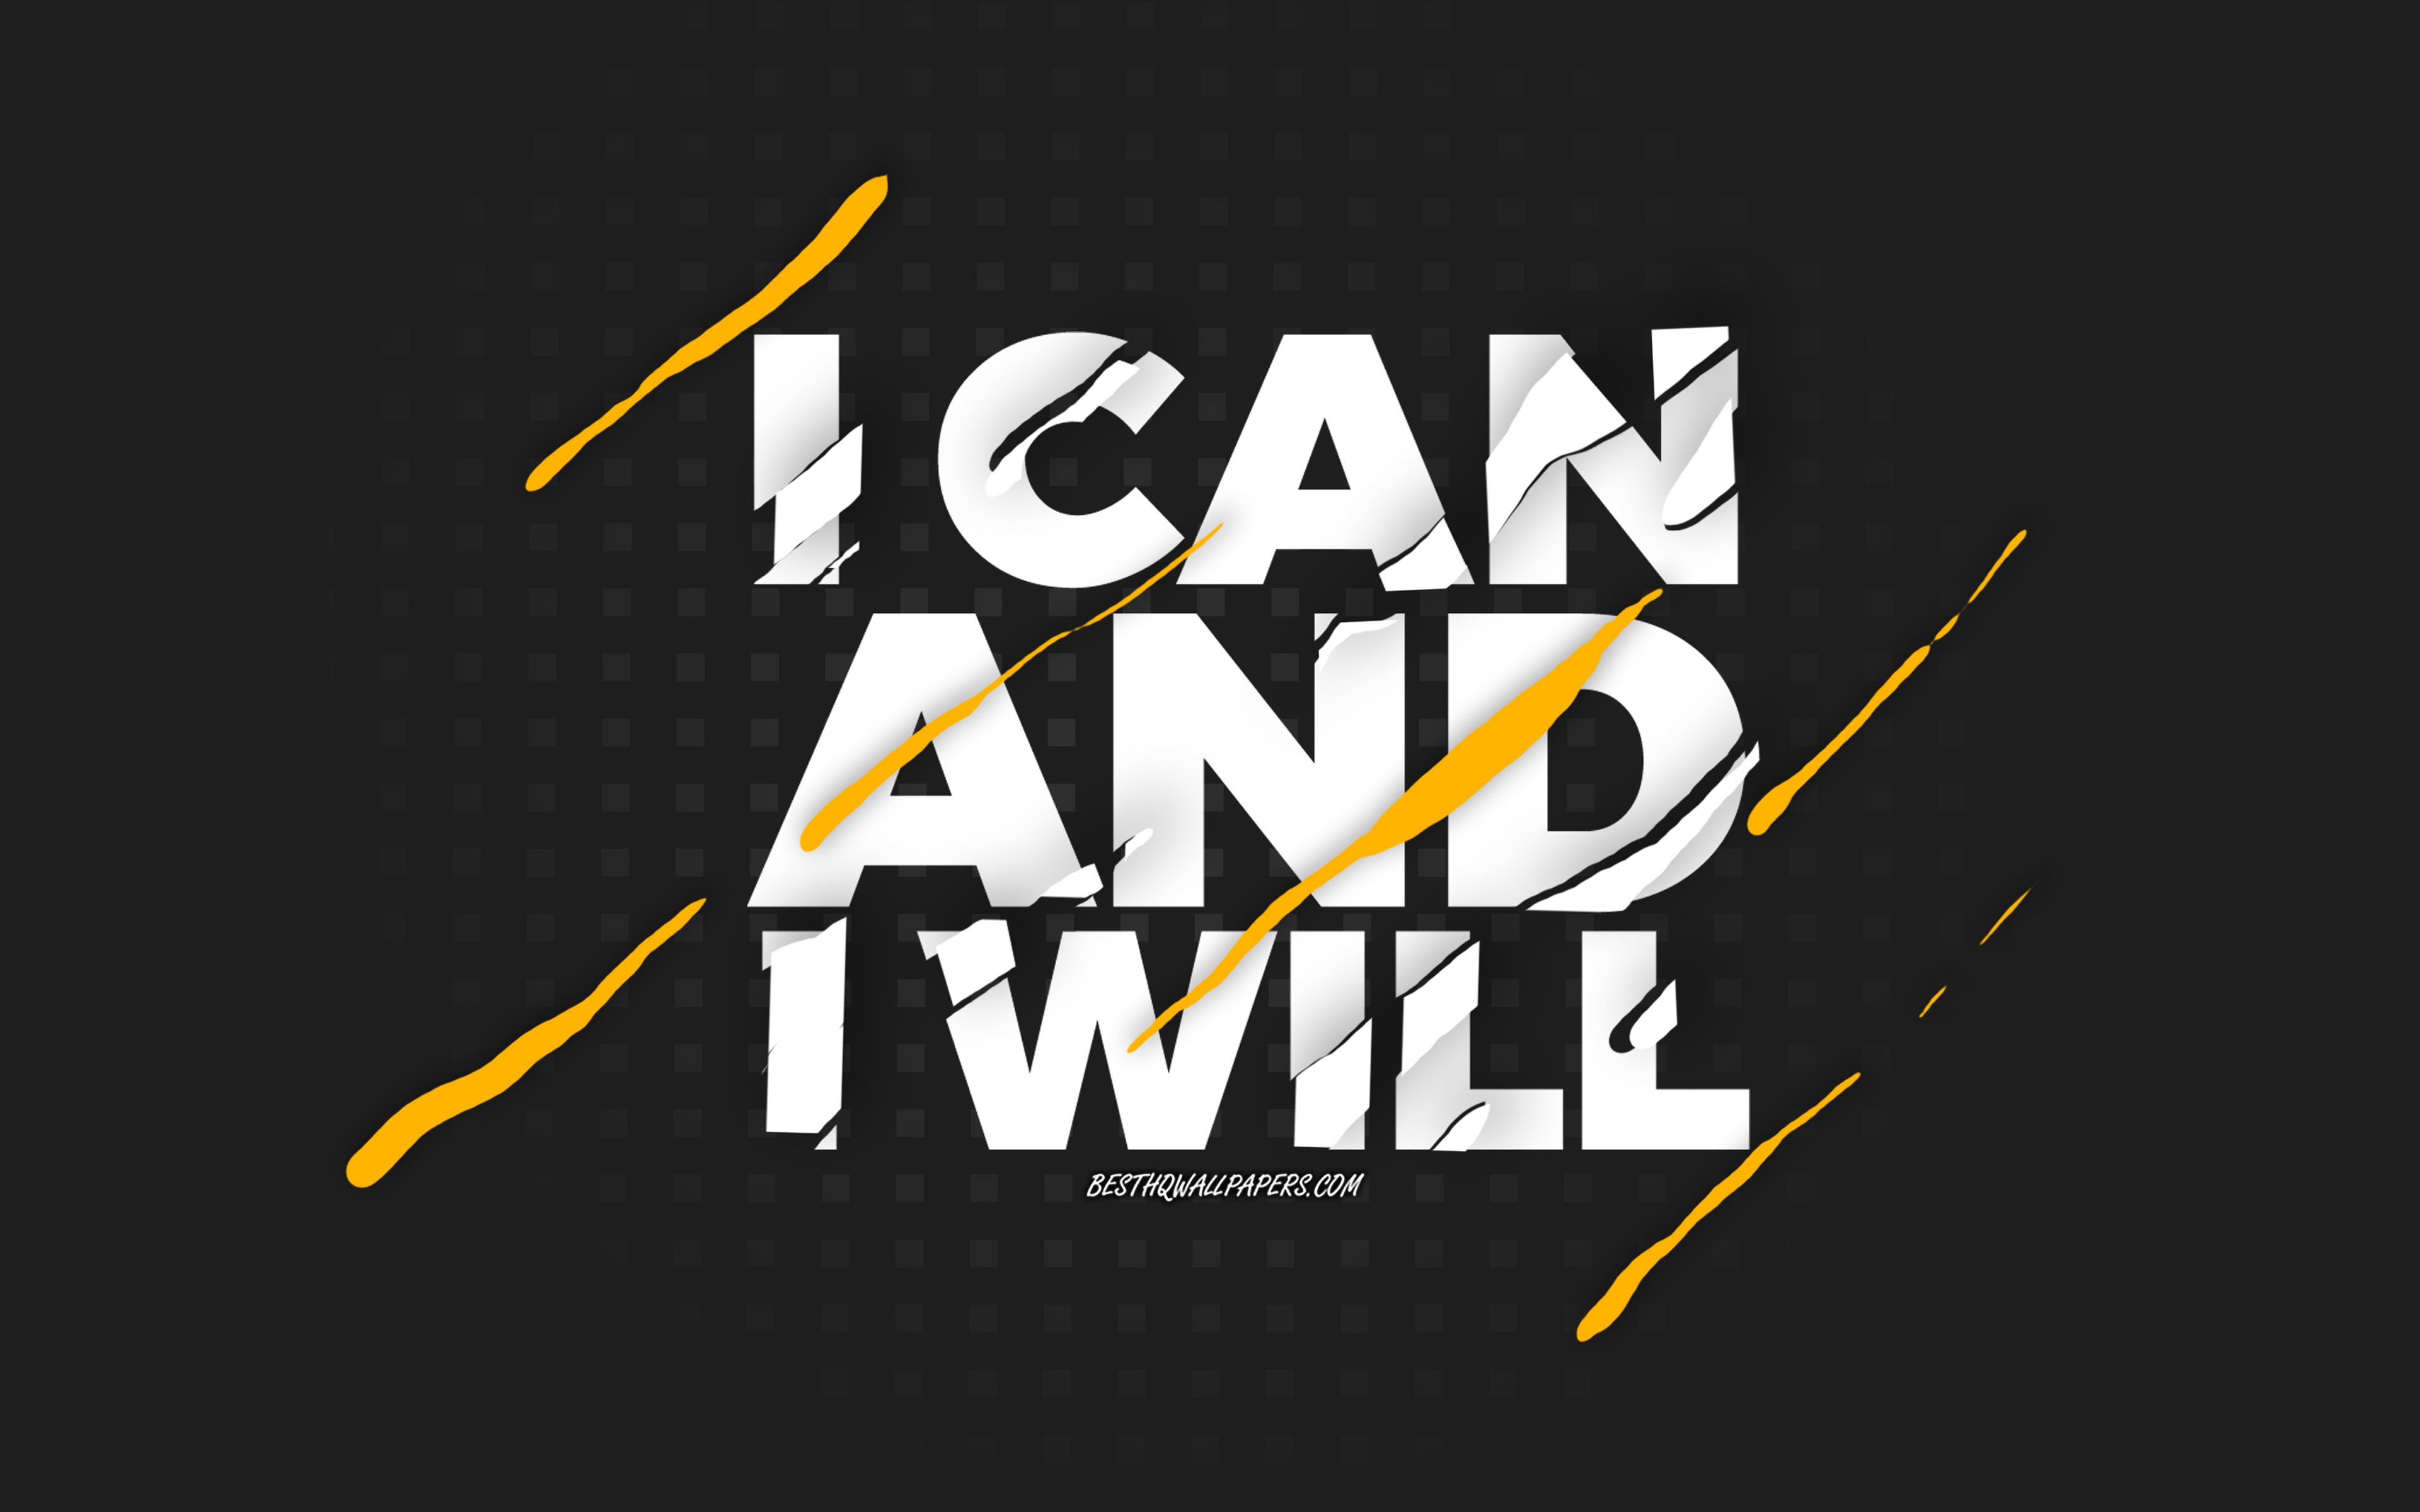 Download wallpaper I can and I will, black background, creative art, I can and I will concepts, motivation quotes, inspiration for desktop with resolution 3840x2400. High Quality HD picture wallpaper